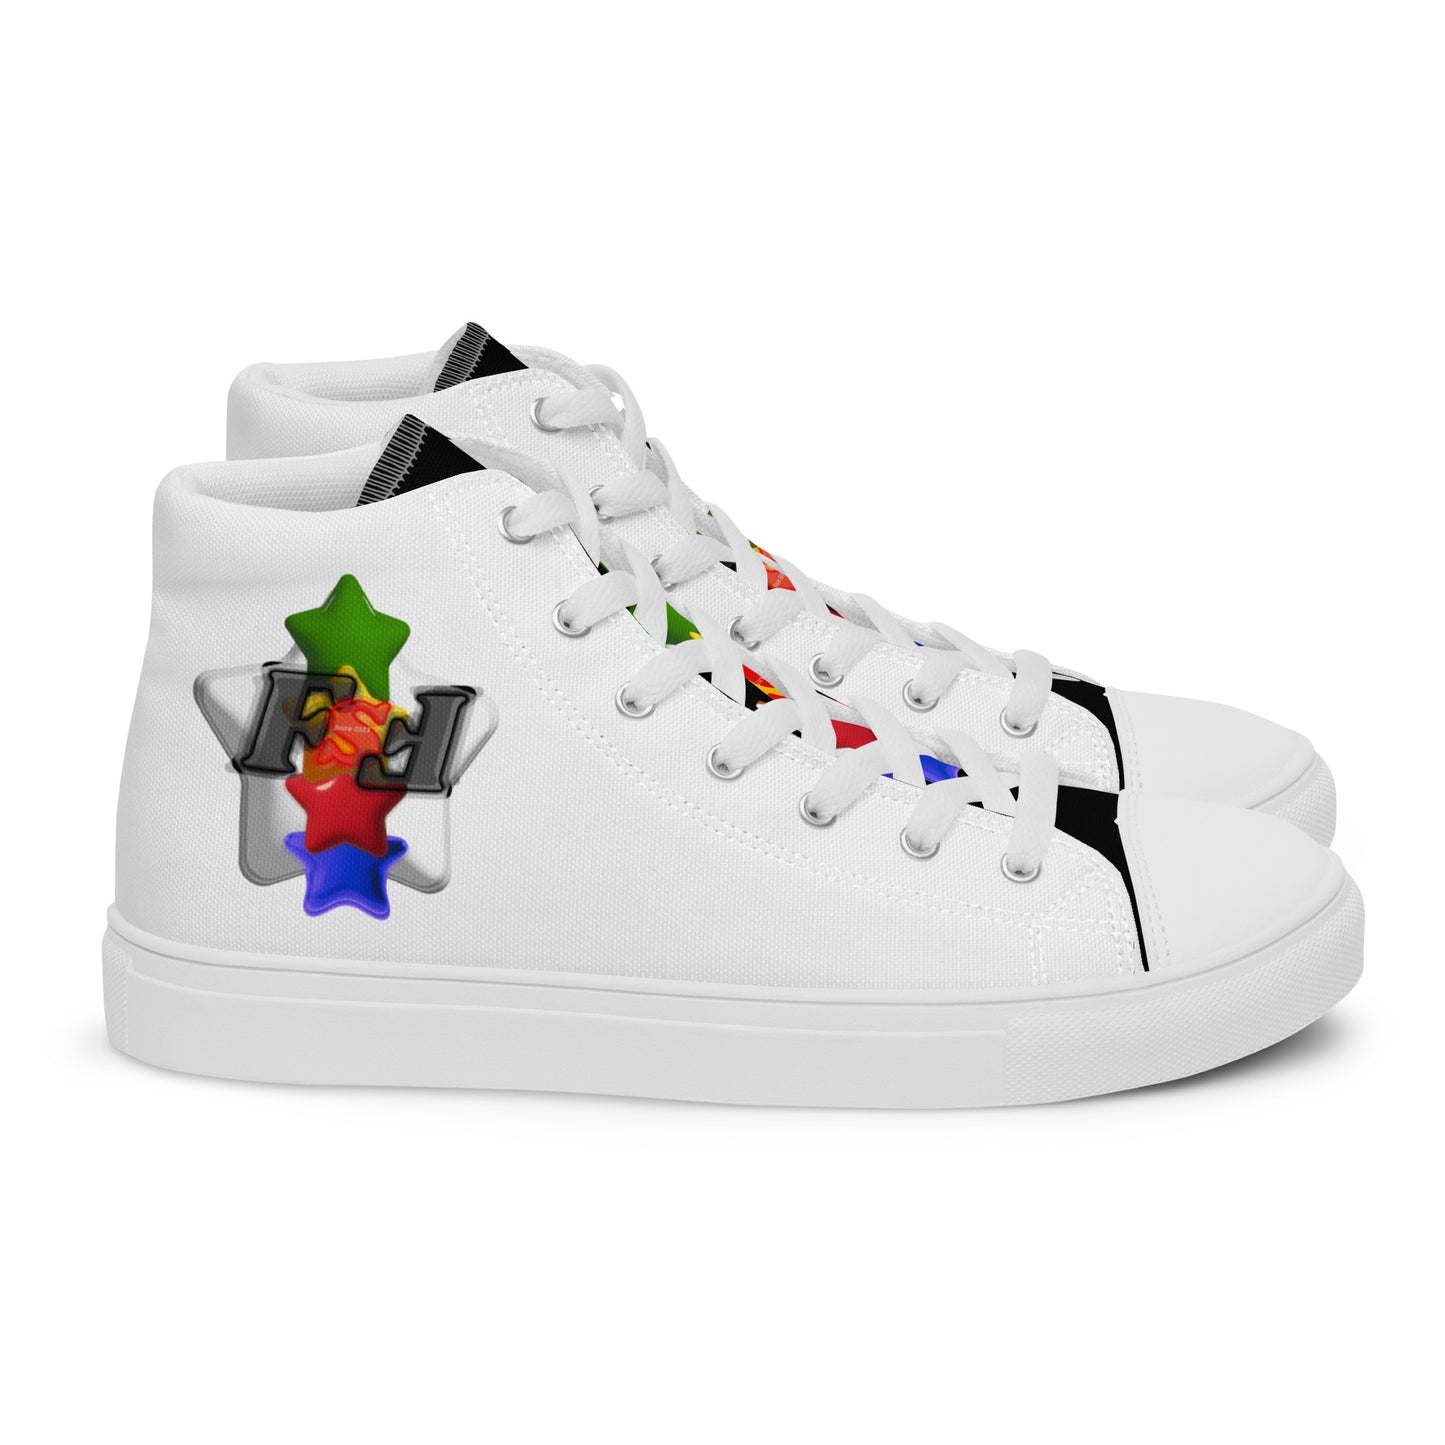 Men’s high top canvas shoes - FSF Stacked 'White Star' White